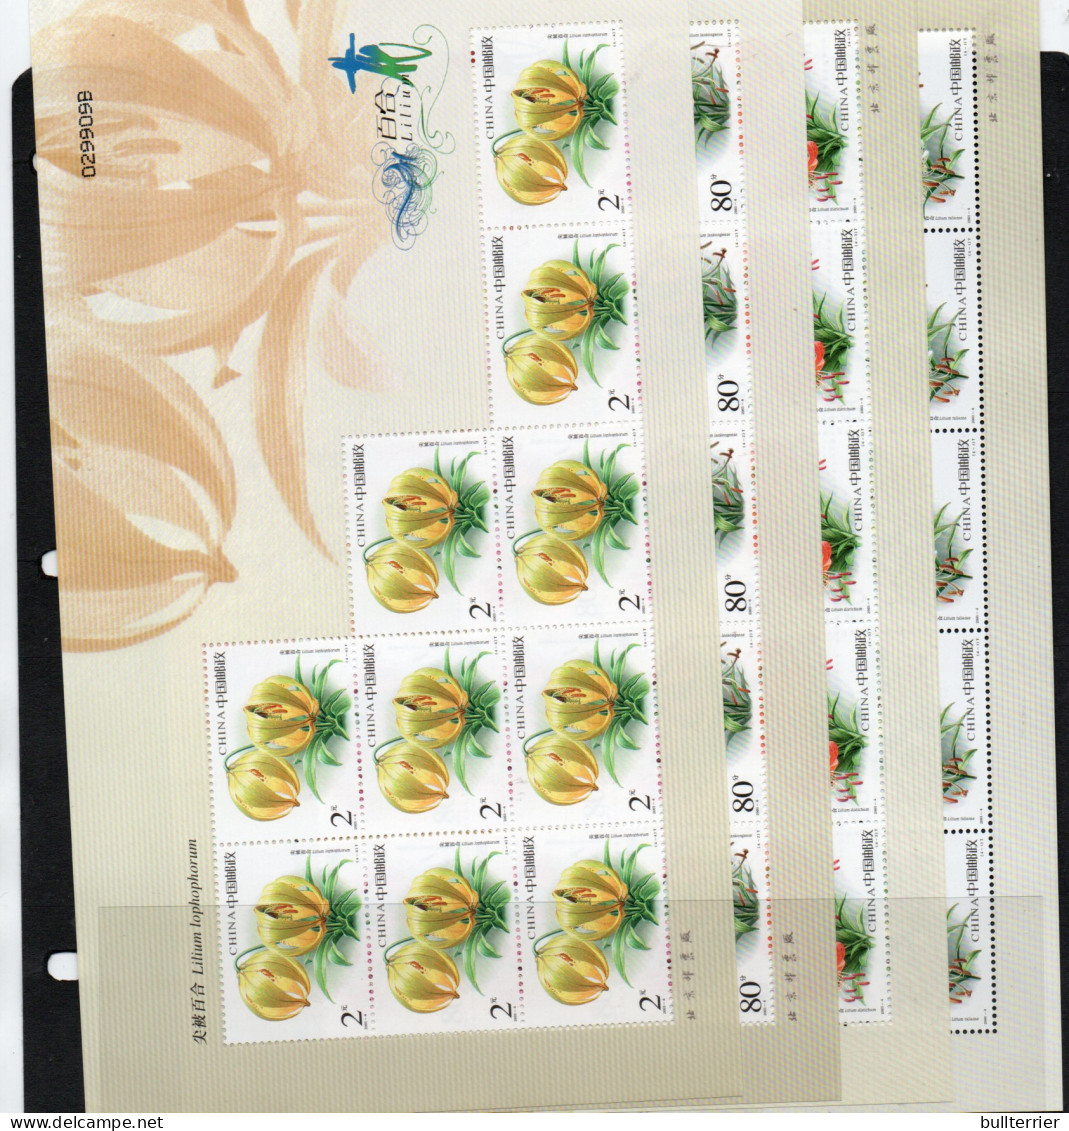 CHINA- 2002 - LILLIES SET OF 4 X SHEETLETS OF 10 MINT NEVER HINGED - Unused Stamps